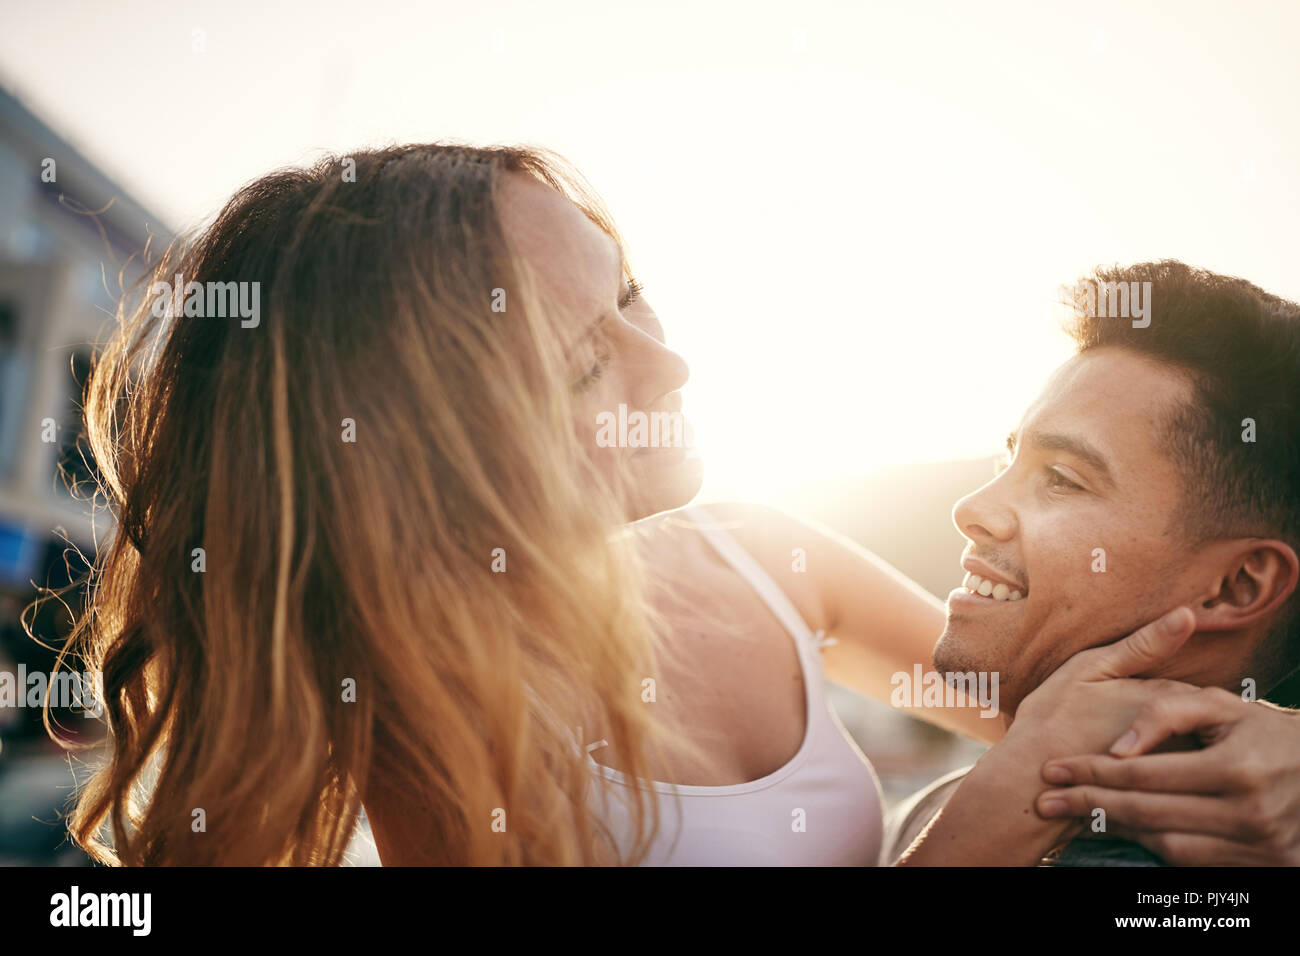 Smiling young woman being held in her boyfriend's arms while having fun together in the city Stock Photo